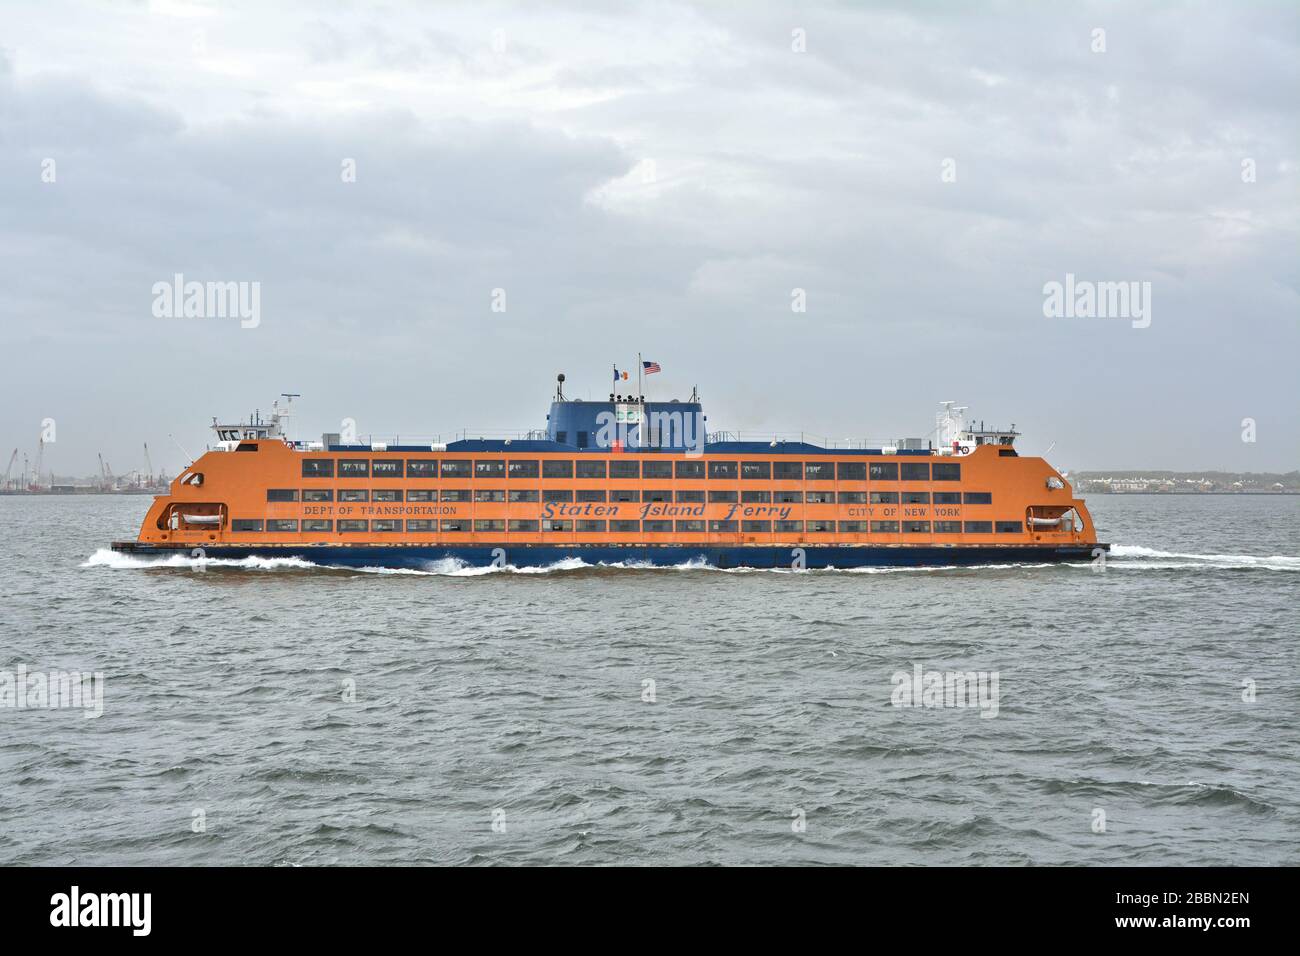 NEW YORK CITY, USA - OCTOBER 15, 2014: Staten Island Ferry departs for Manhattan. The ferry carries over 21 million passengers a year Stock Photo